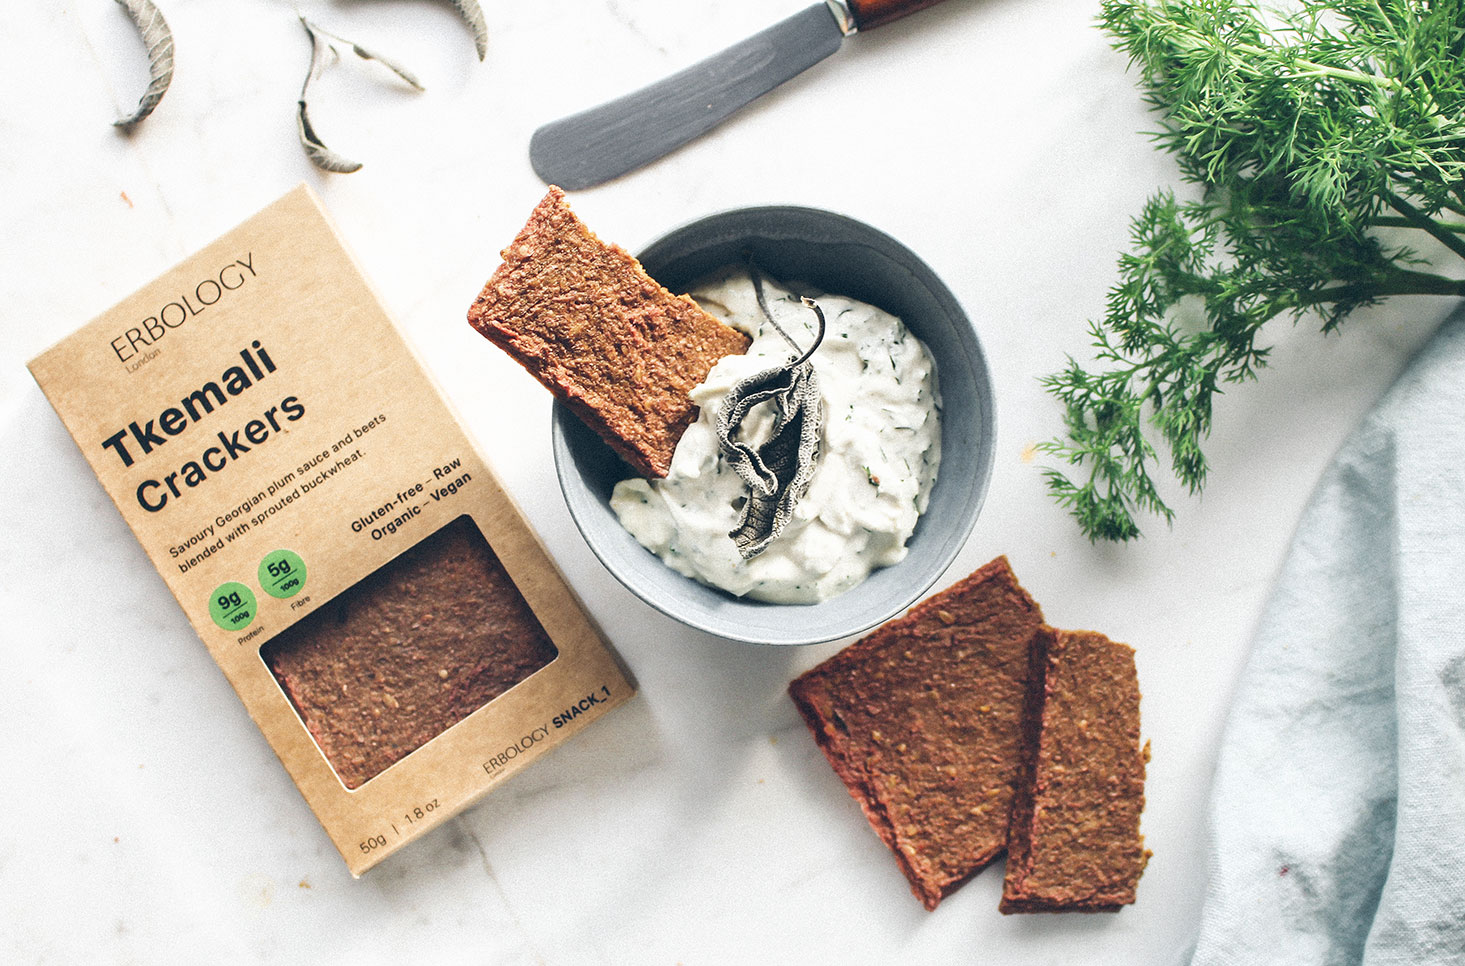 New plant-based snack launch makes powerful ingredients accessible everyday.